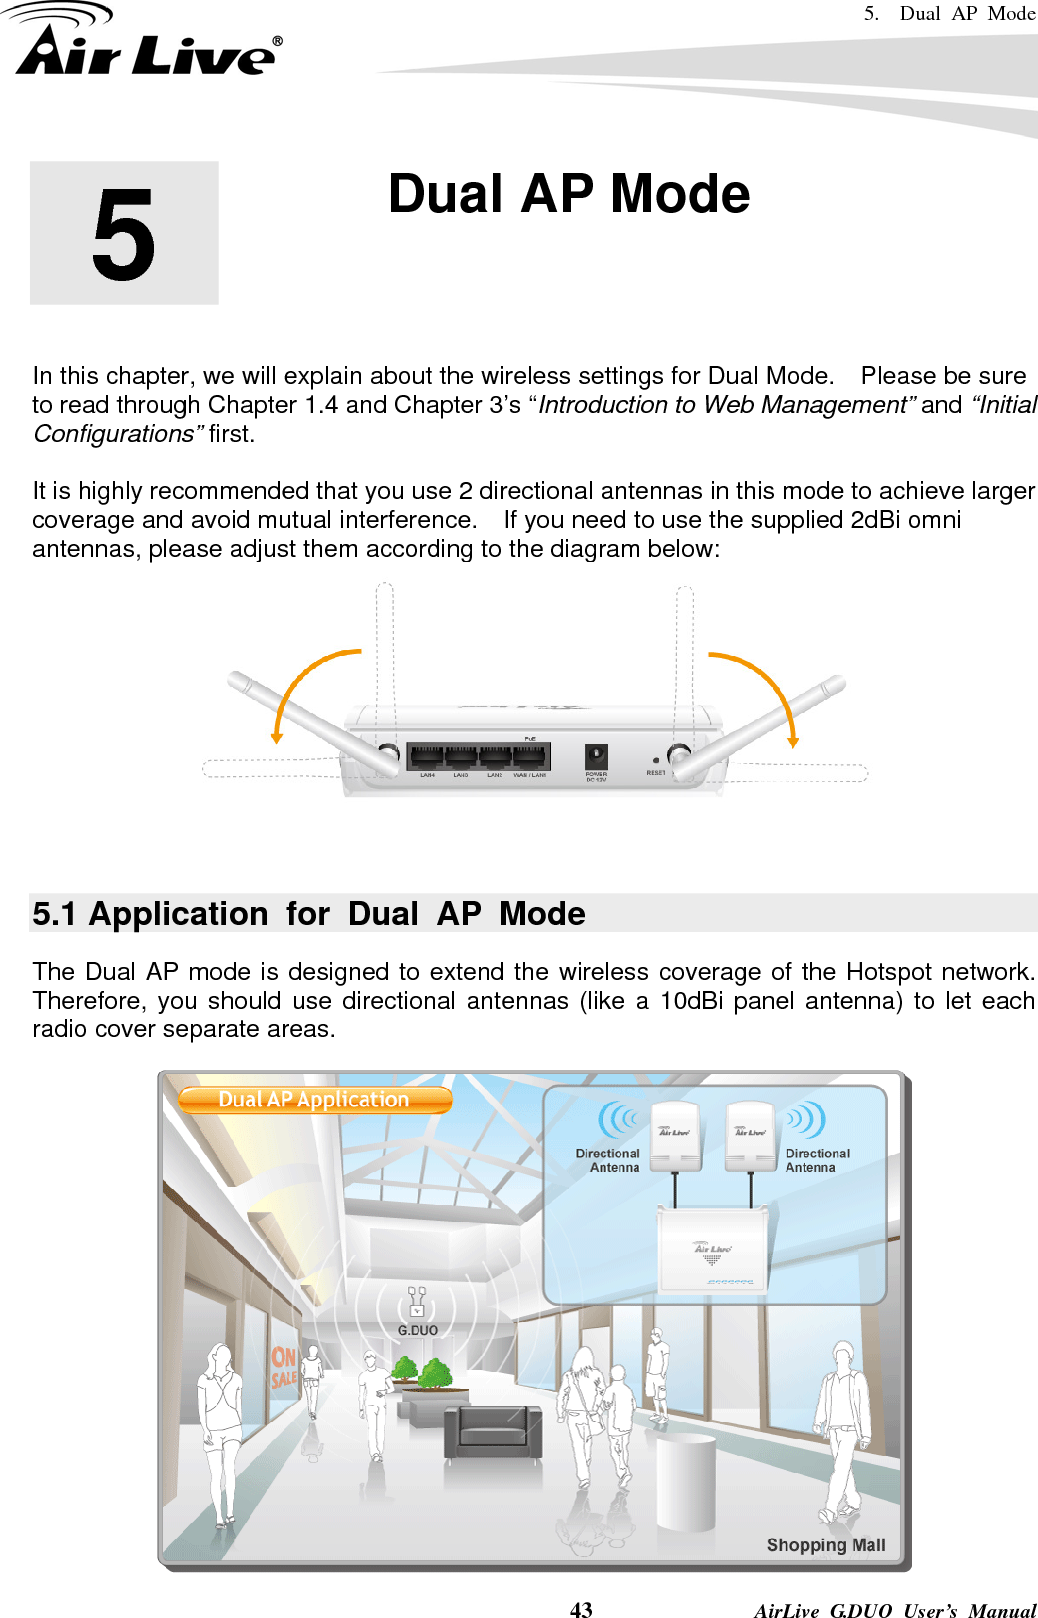 5.  Dual AP Mode    43              AirLive G.DUO User’s Manual        In this chapter, we will explain about the wireless settings for Dual Mode.    Please be sure to read through Chapter 1.4 and Chapter 3’s “Introduction to Web Management” and “Initial Configurations” first.    It is highly recommended that you use 2 directional antennas in this mode to achieve larger coverage and avoid mutual interference.    If you need to use the supplied 2dBi omni antennas, please adjust them according to the diagram below:   5.1 Application for Dual AP Mode The Dual AP mode is designed to extend the wireless coverage of the Hotspot network.   Therefore, you should use directional antennas (like a 10dBi panel antenna) to let each radio cover separate areas.  5  5. Dual AP Mode  